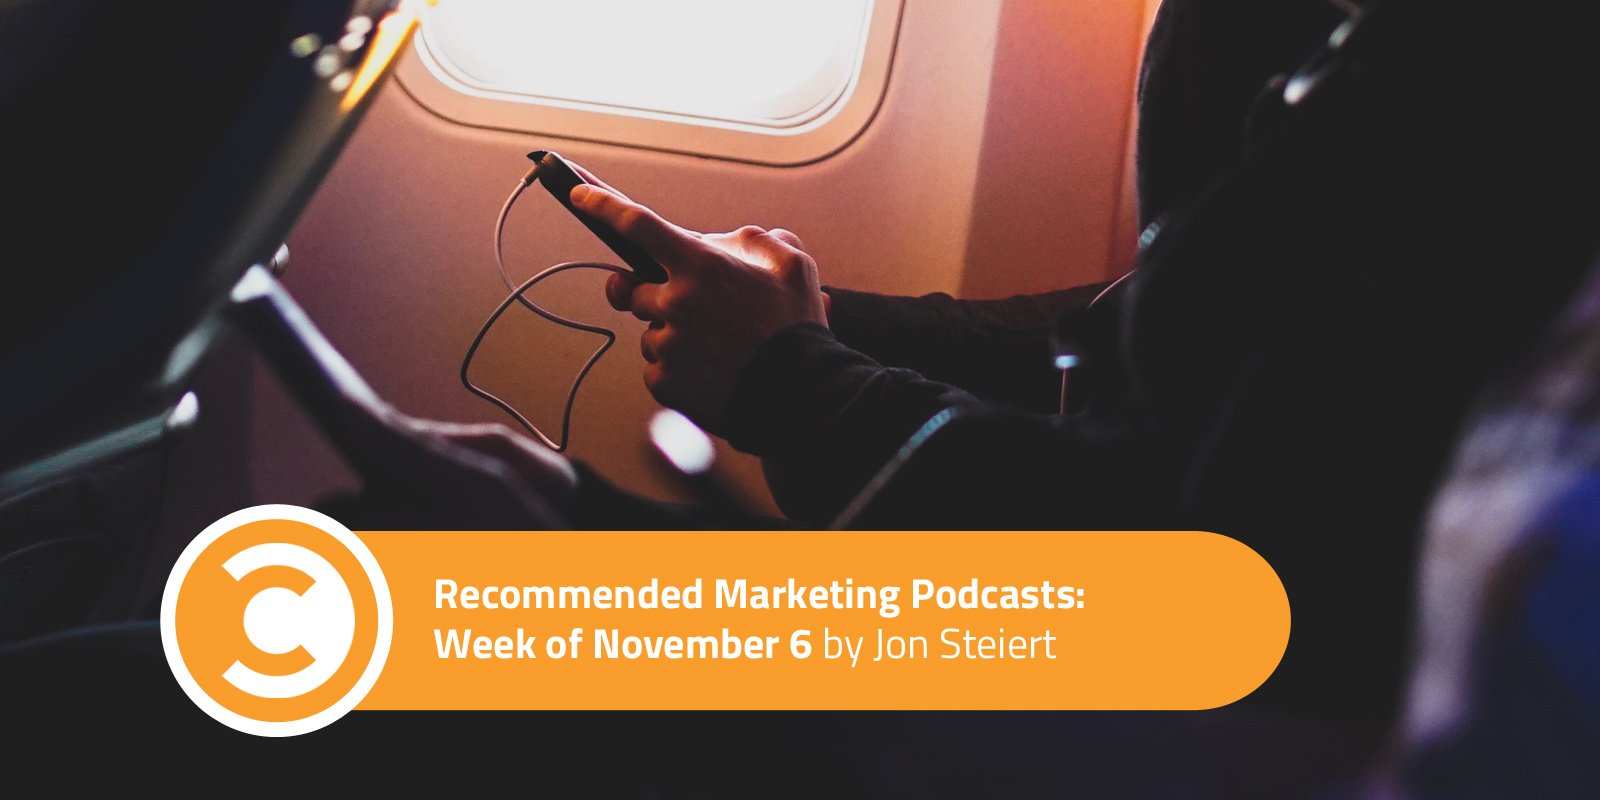 Recommended Marketing Podcasts Week of November 6